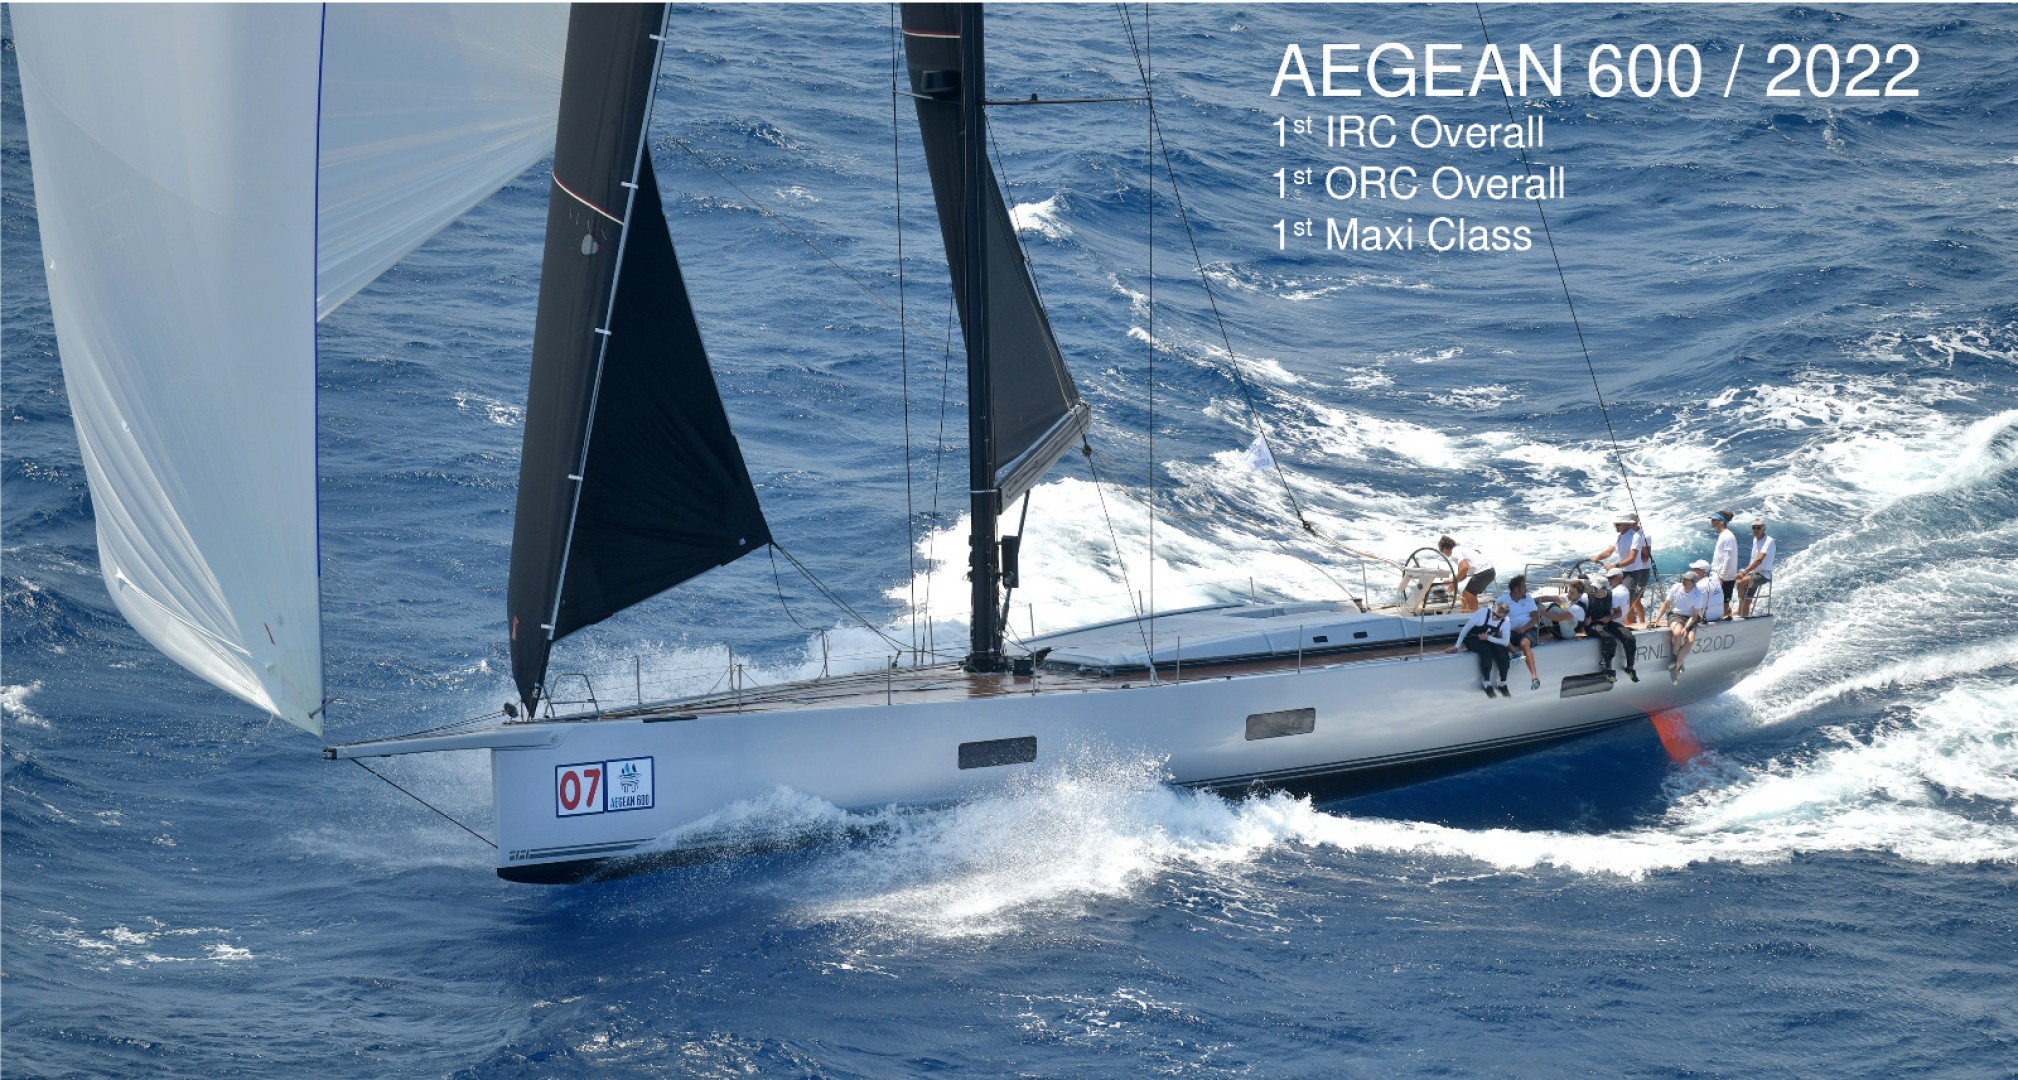 ORC and IRC winner  Scuderia 65' Hagar V designed by Harry Miesbauer and owned by Gregor Stimpl